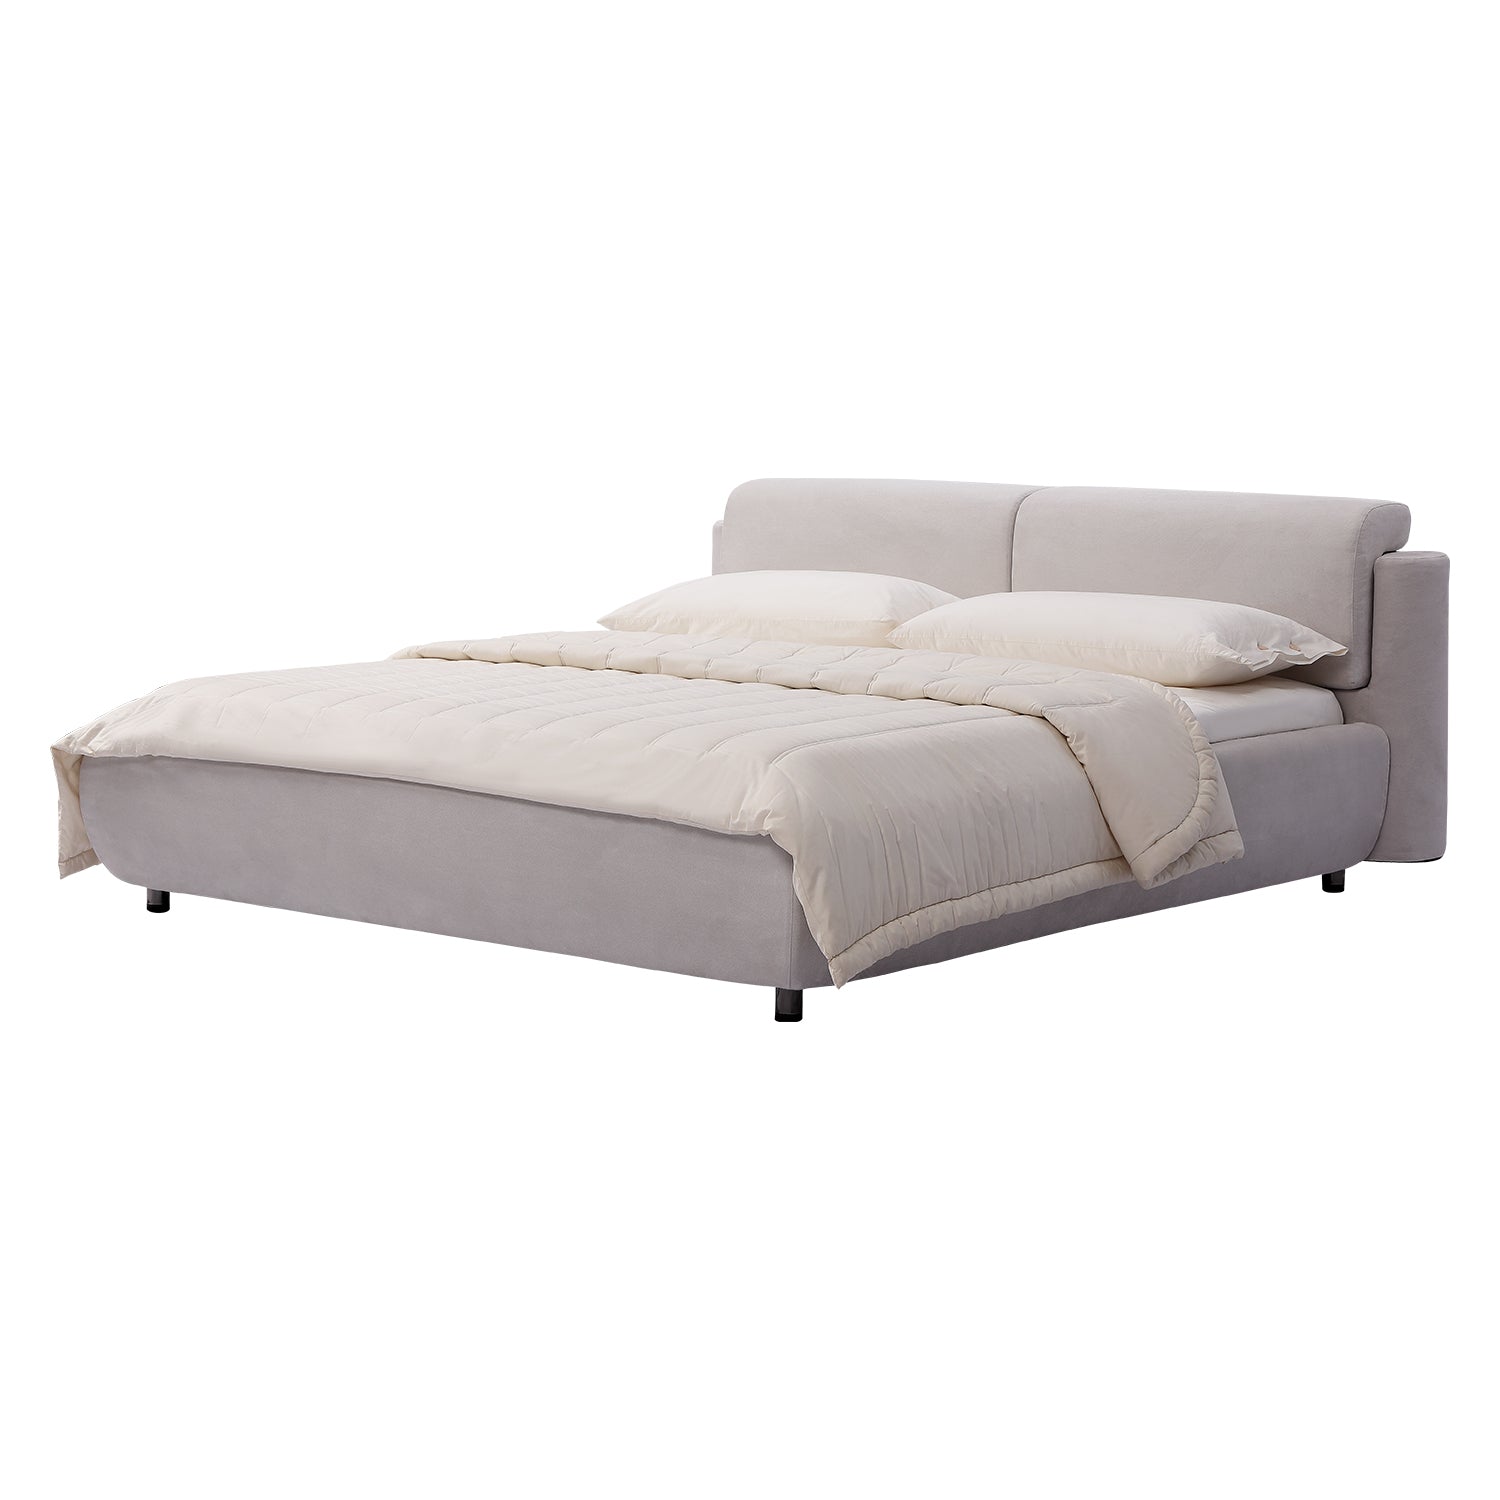 DeRUCCI Bed Frame BZZ4 - 082 in light-colored fabric with padded headboard and minimalist modern design.